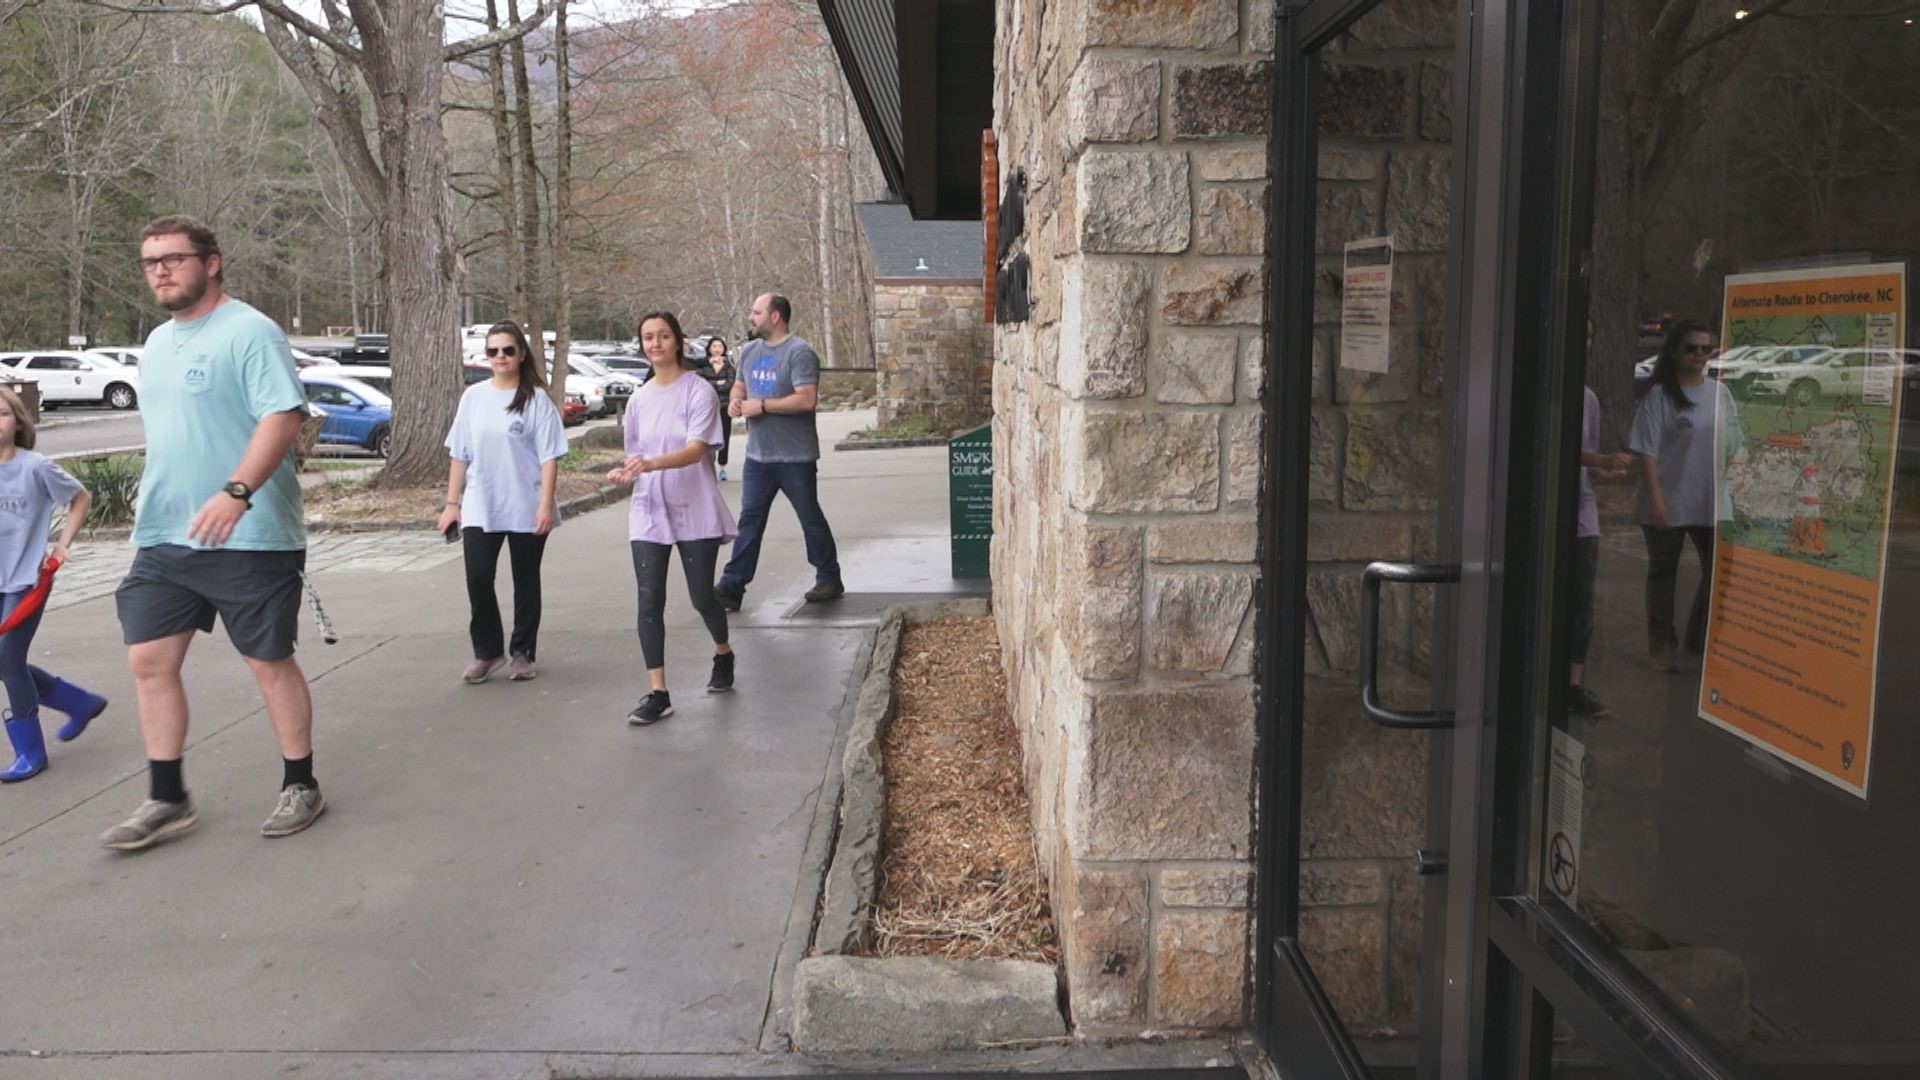 You wouldn't know it from the parking lots, but popular businesses in Gatlinburg and visitor centers in the Smokies are closed as a precaution for the coronavirus.